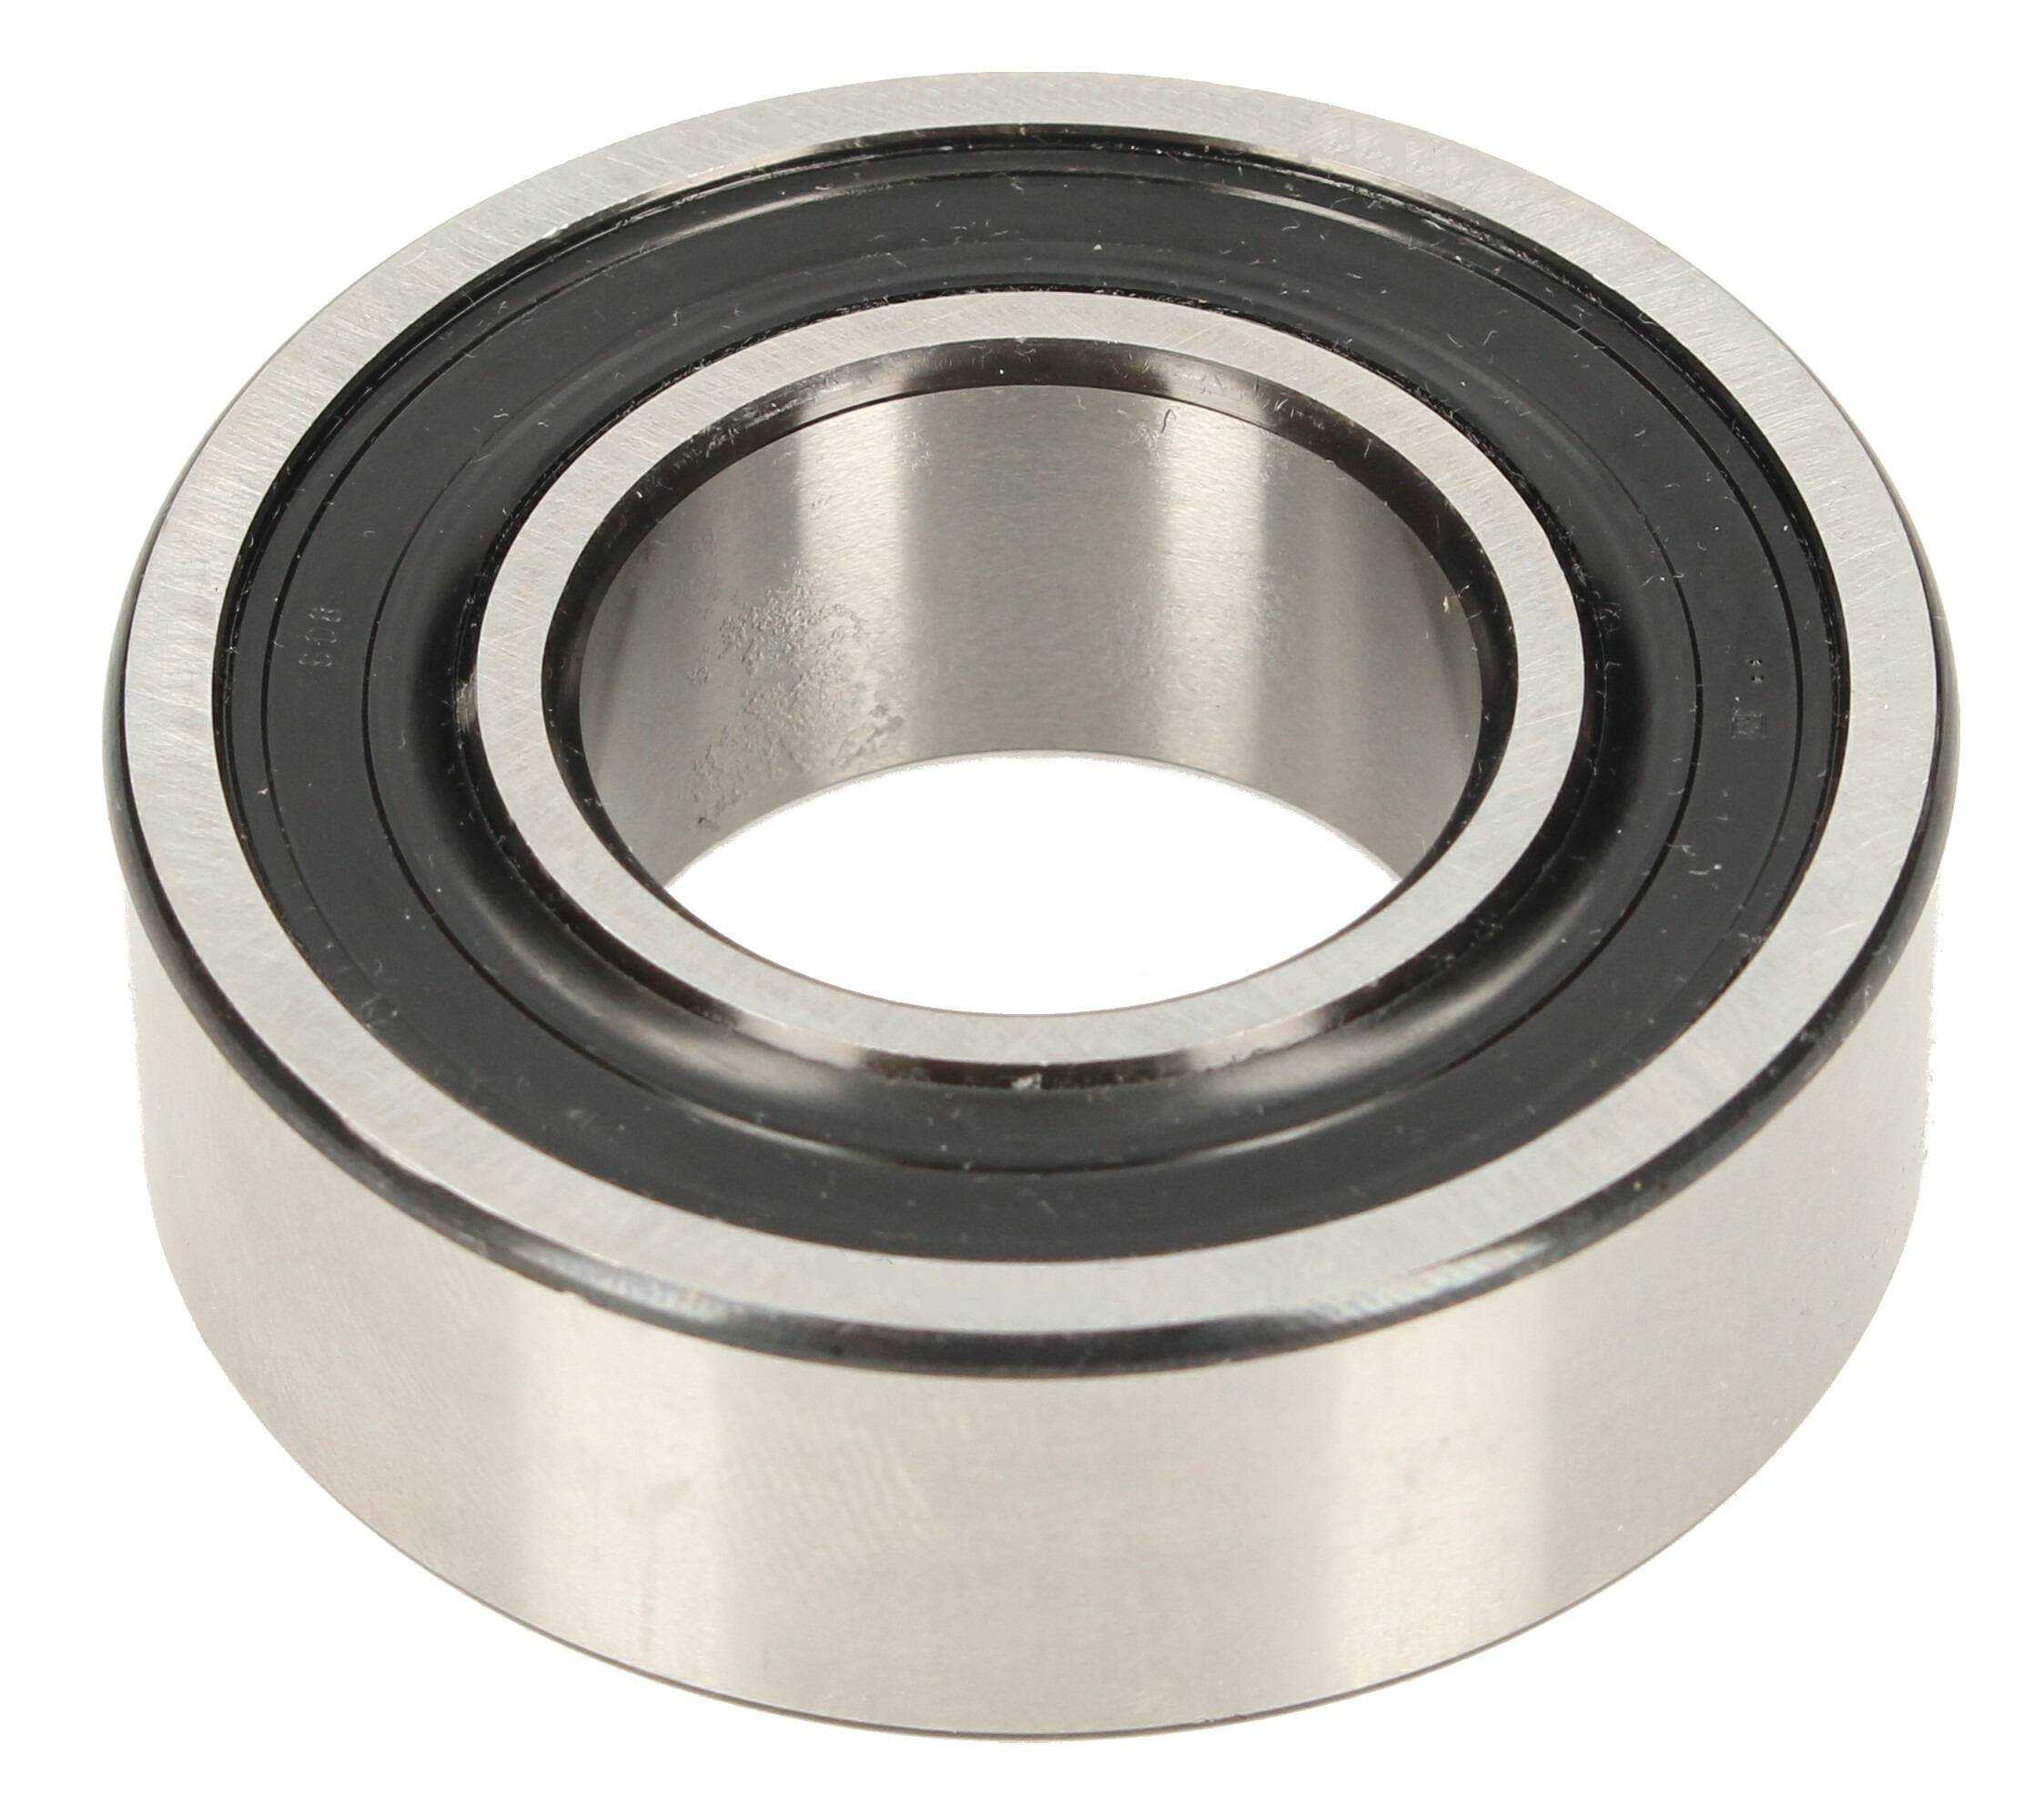 BALL BEARING 6003-2RS SKF (WITHOUT PACKAGING) - Image 1